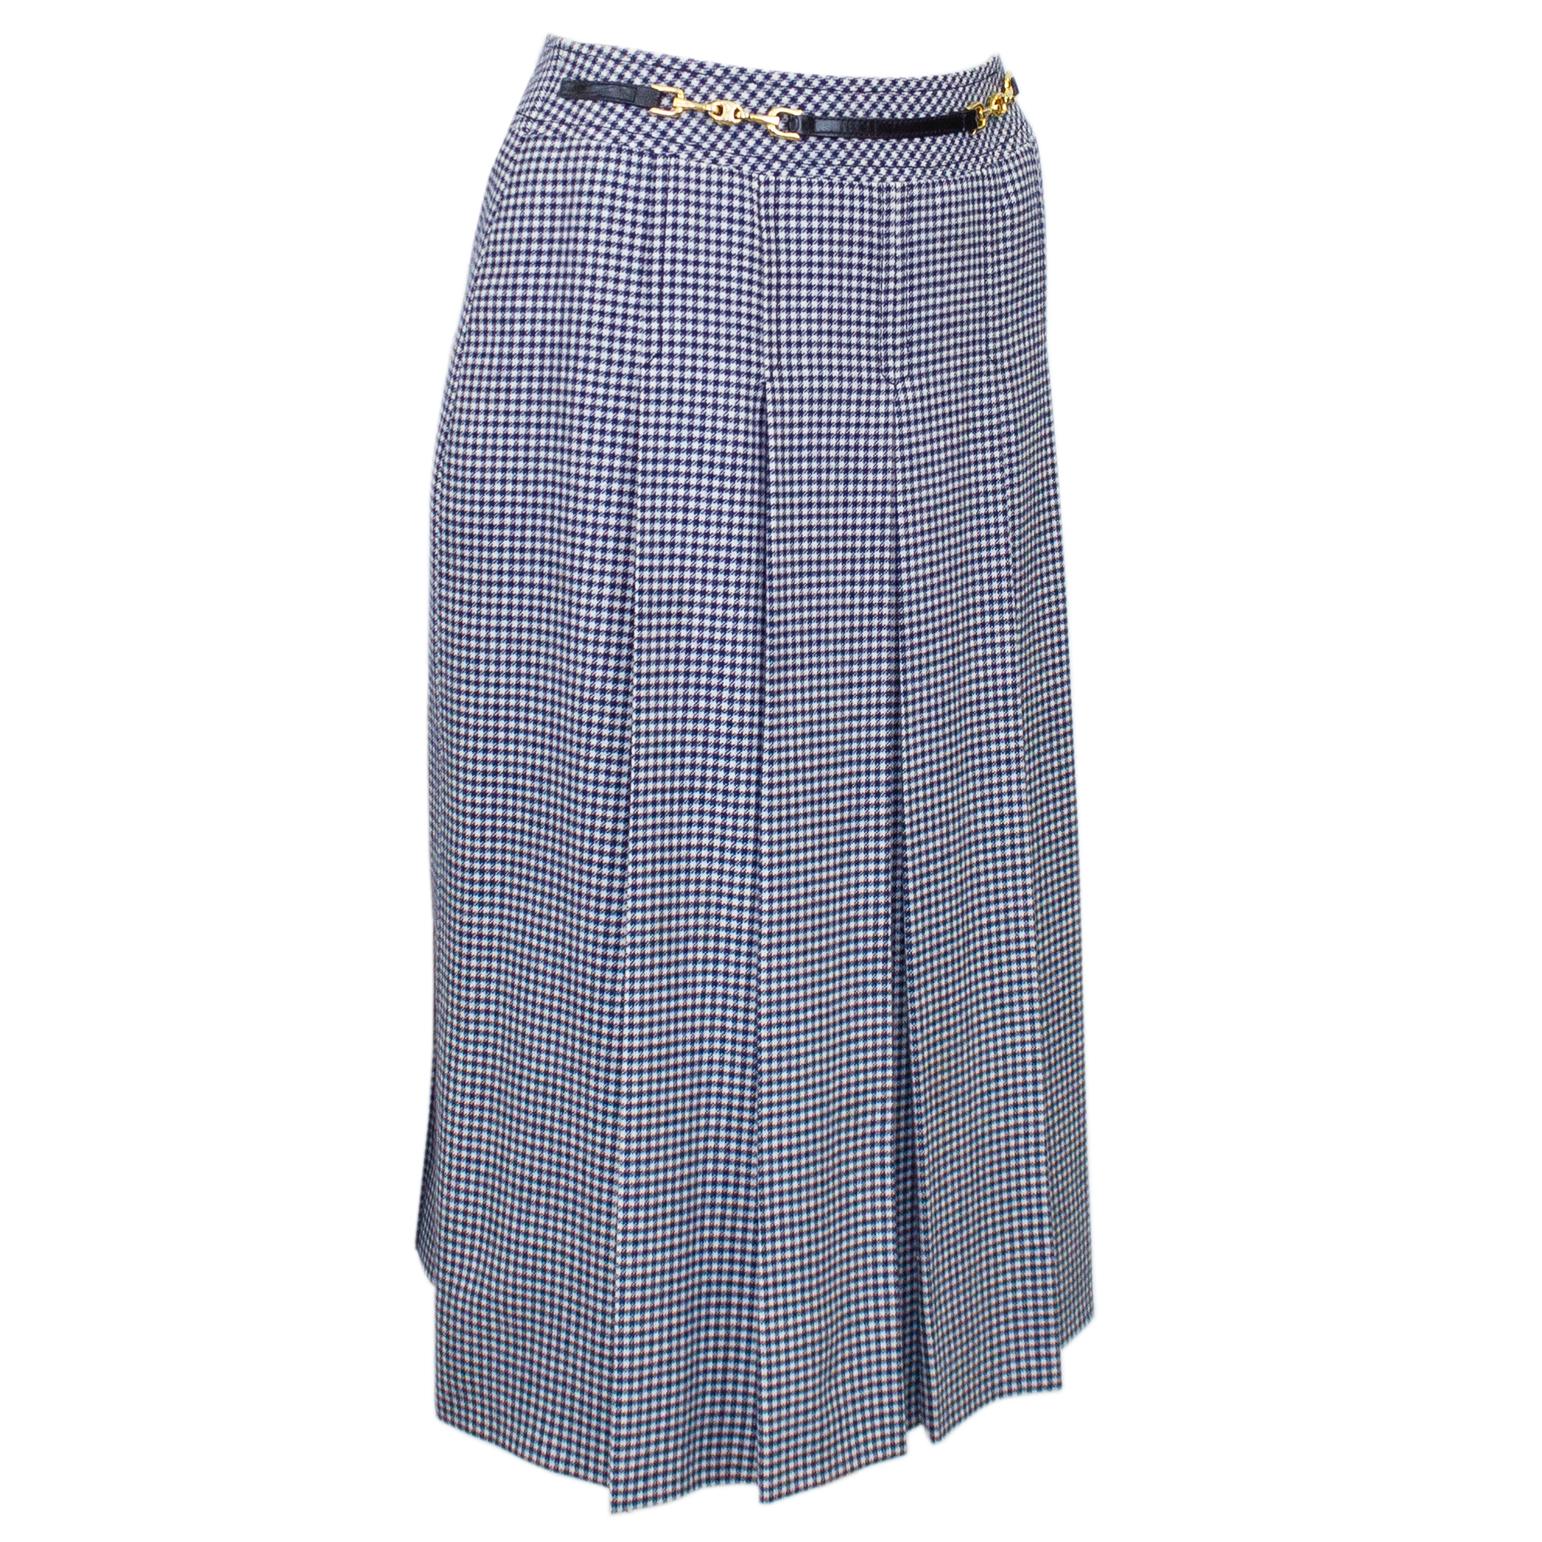 Celine navy wool stitched box pleat skirt from the 1970s. The mini houndstooth print is accented with the iconic Celine waist buckle. In excellent condition, fits like a US 2/4. Zips up the back and fully lined in CELINE printed navy silk. 

Waist